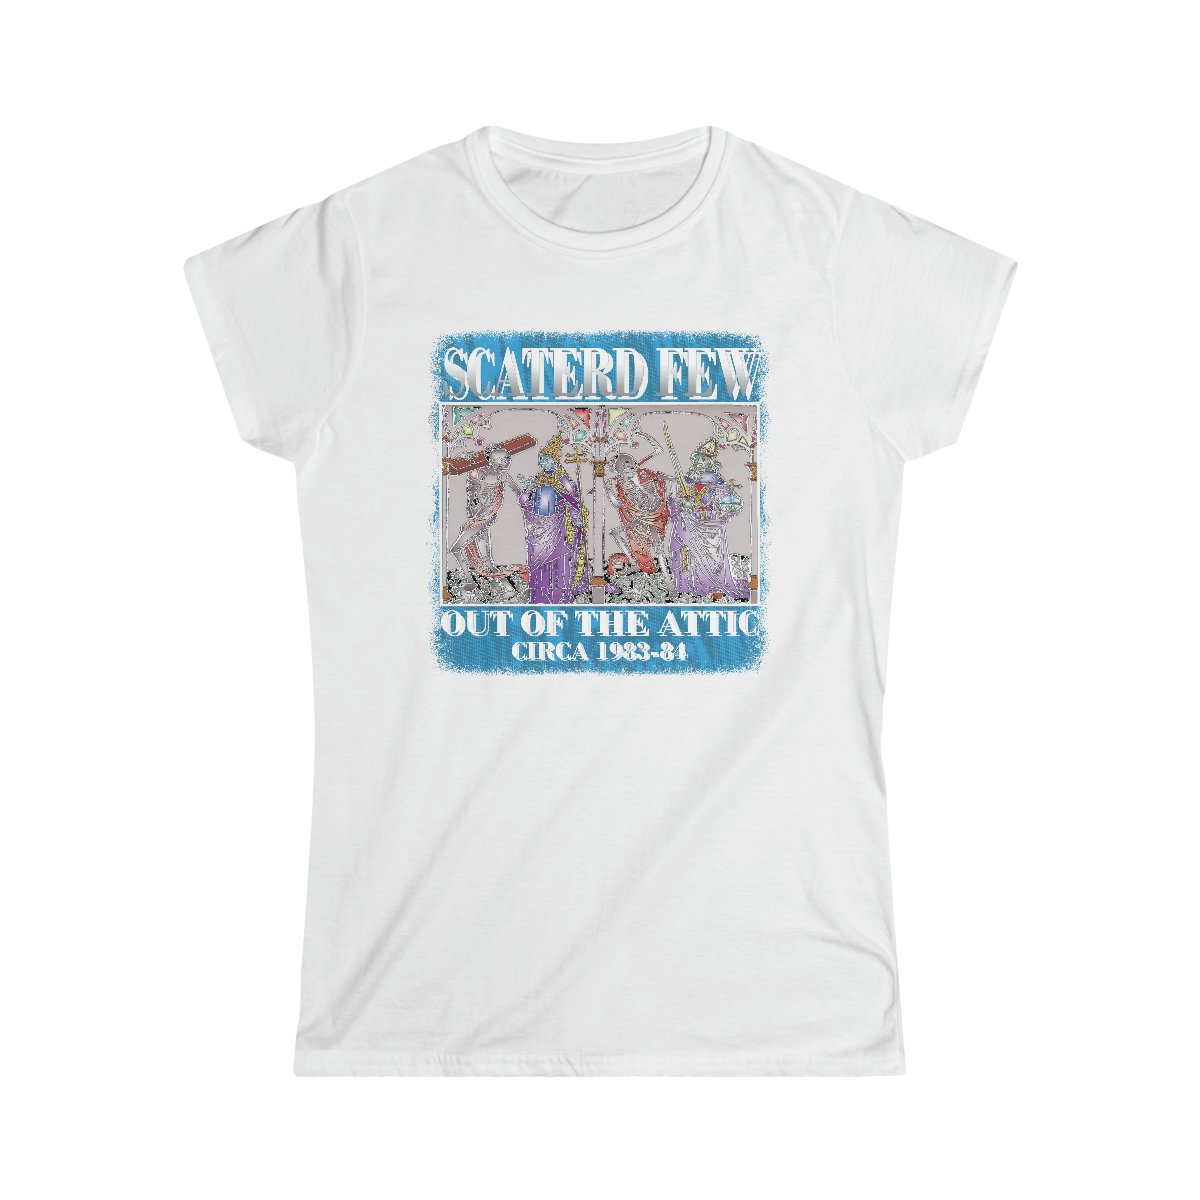 Scaterd Few – Out Of The Attic Women’s Short Sleeve Tshirt 64000L